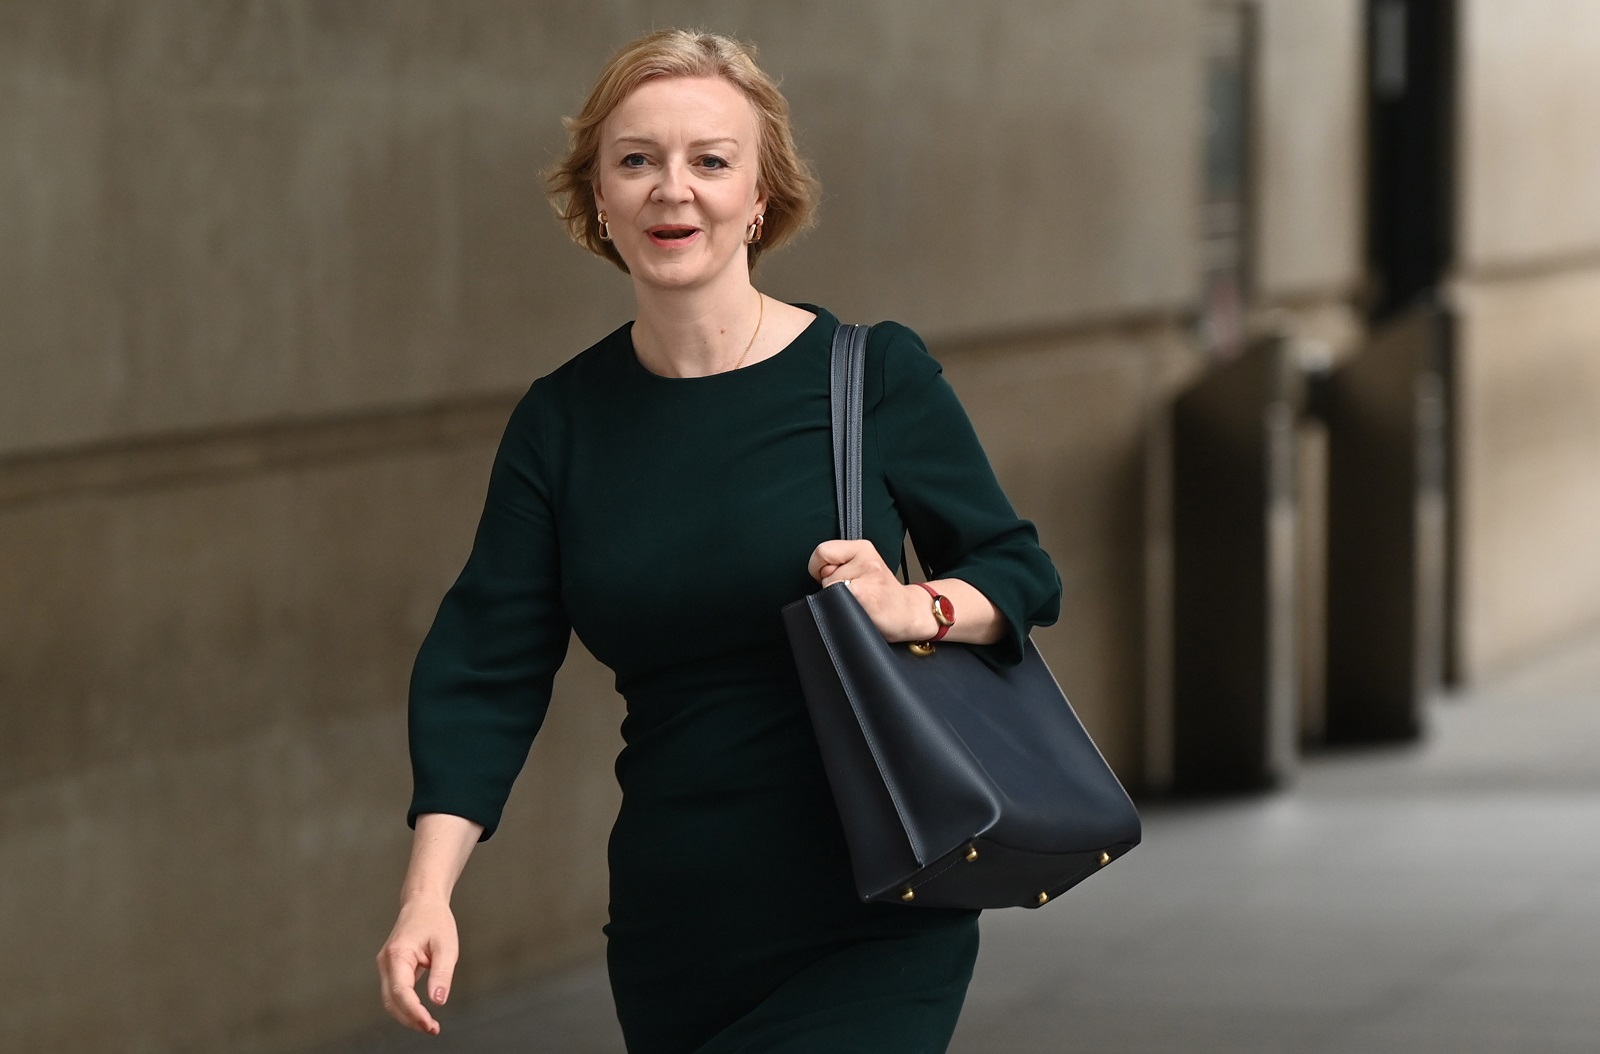 epa10158911 Britain's Foreign Secretary Liz Truss arrives at BBC Broadcasting House in London, Britain, 04 September 2022. Liz Truss and Rishi Sunak are the final two candidates in the race to be next Conservative Party leader and UK Prime Minister. The ballot among party members closed on 02 September with the winner to be announced on 05 September.  EPA/NEIL HALL